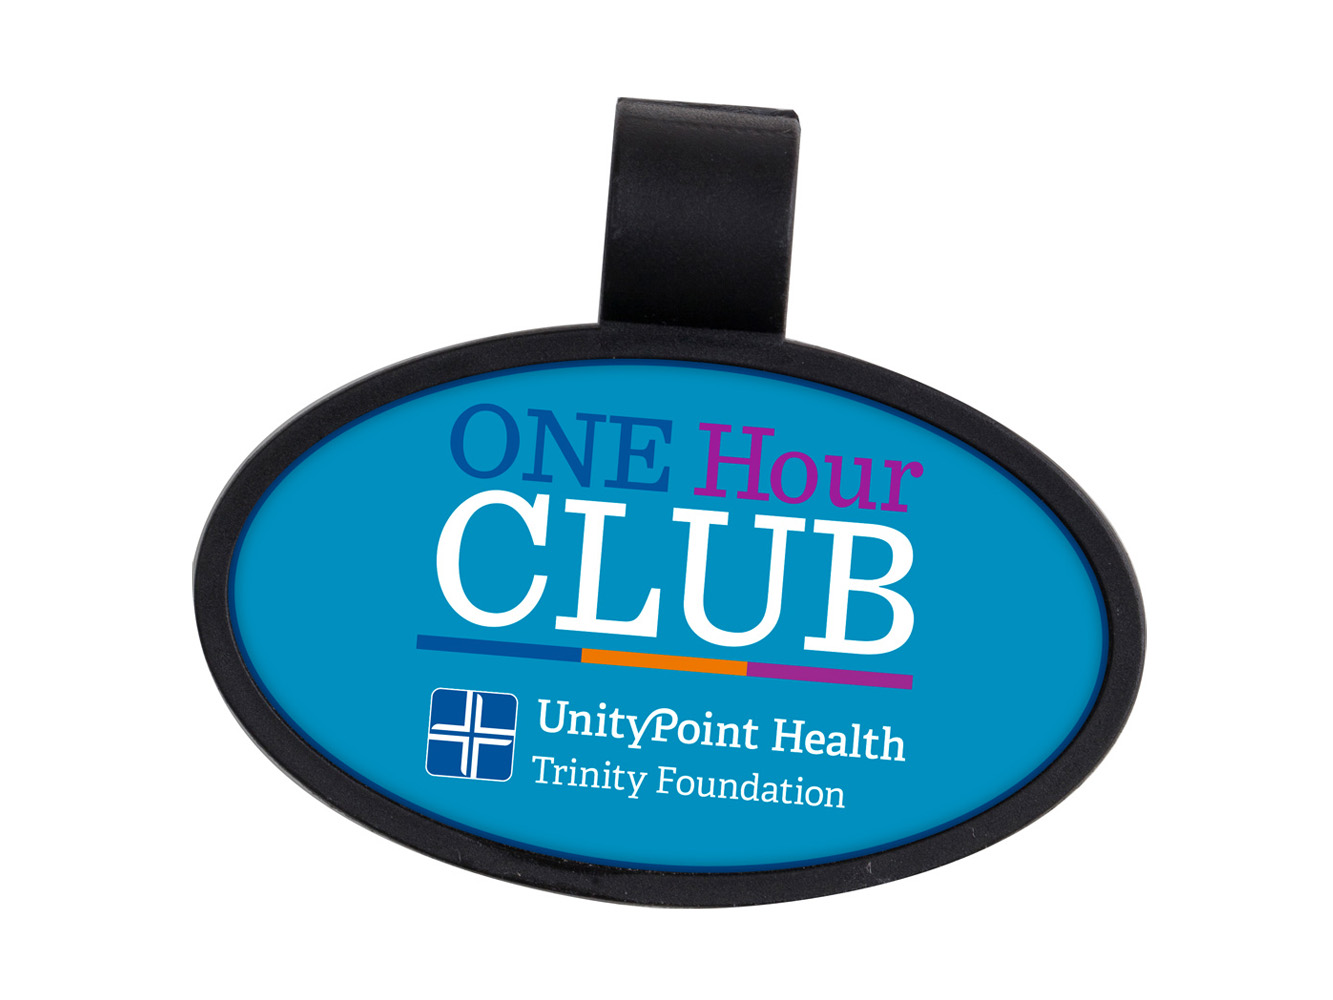 ST66: Anti-Microbial Oval Stethoscope ID Tag